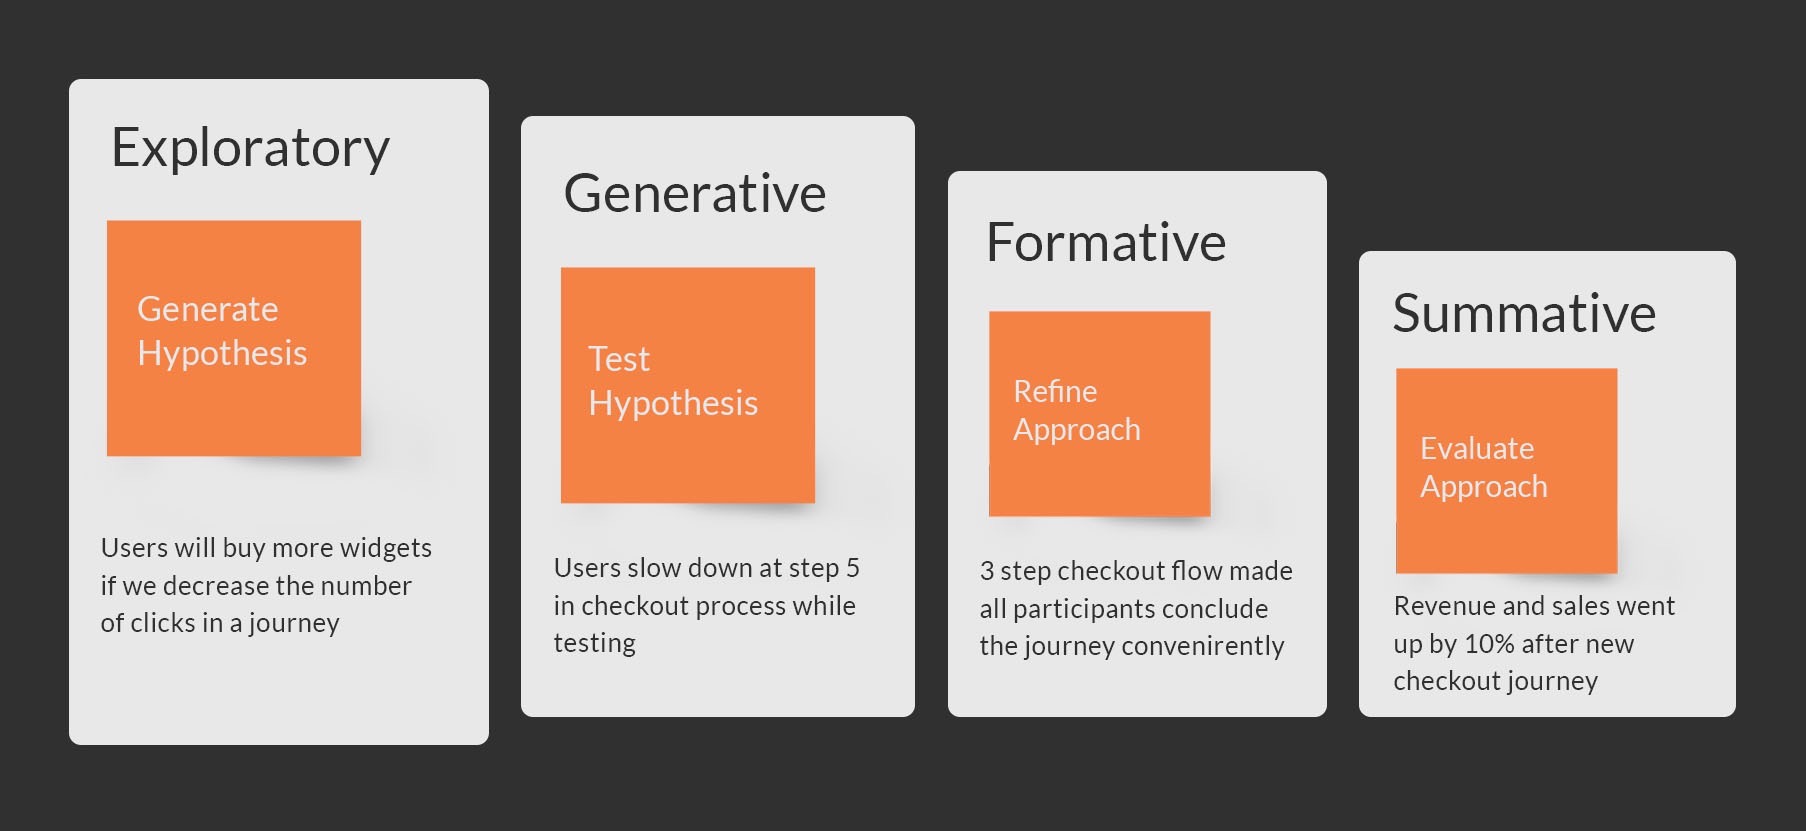 4 Types of Customer Research: Exploratory, Generative, Formative, and Summative Research